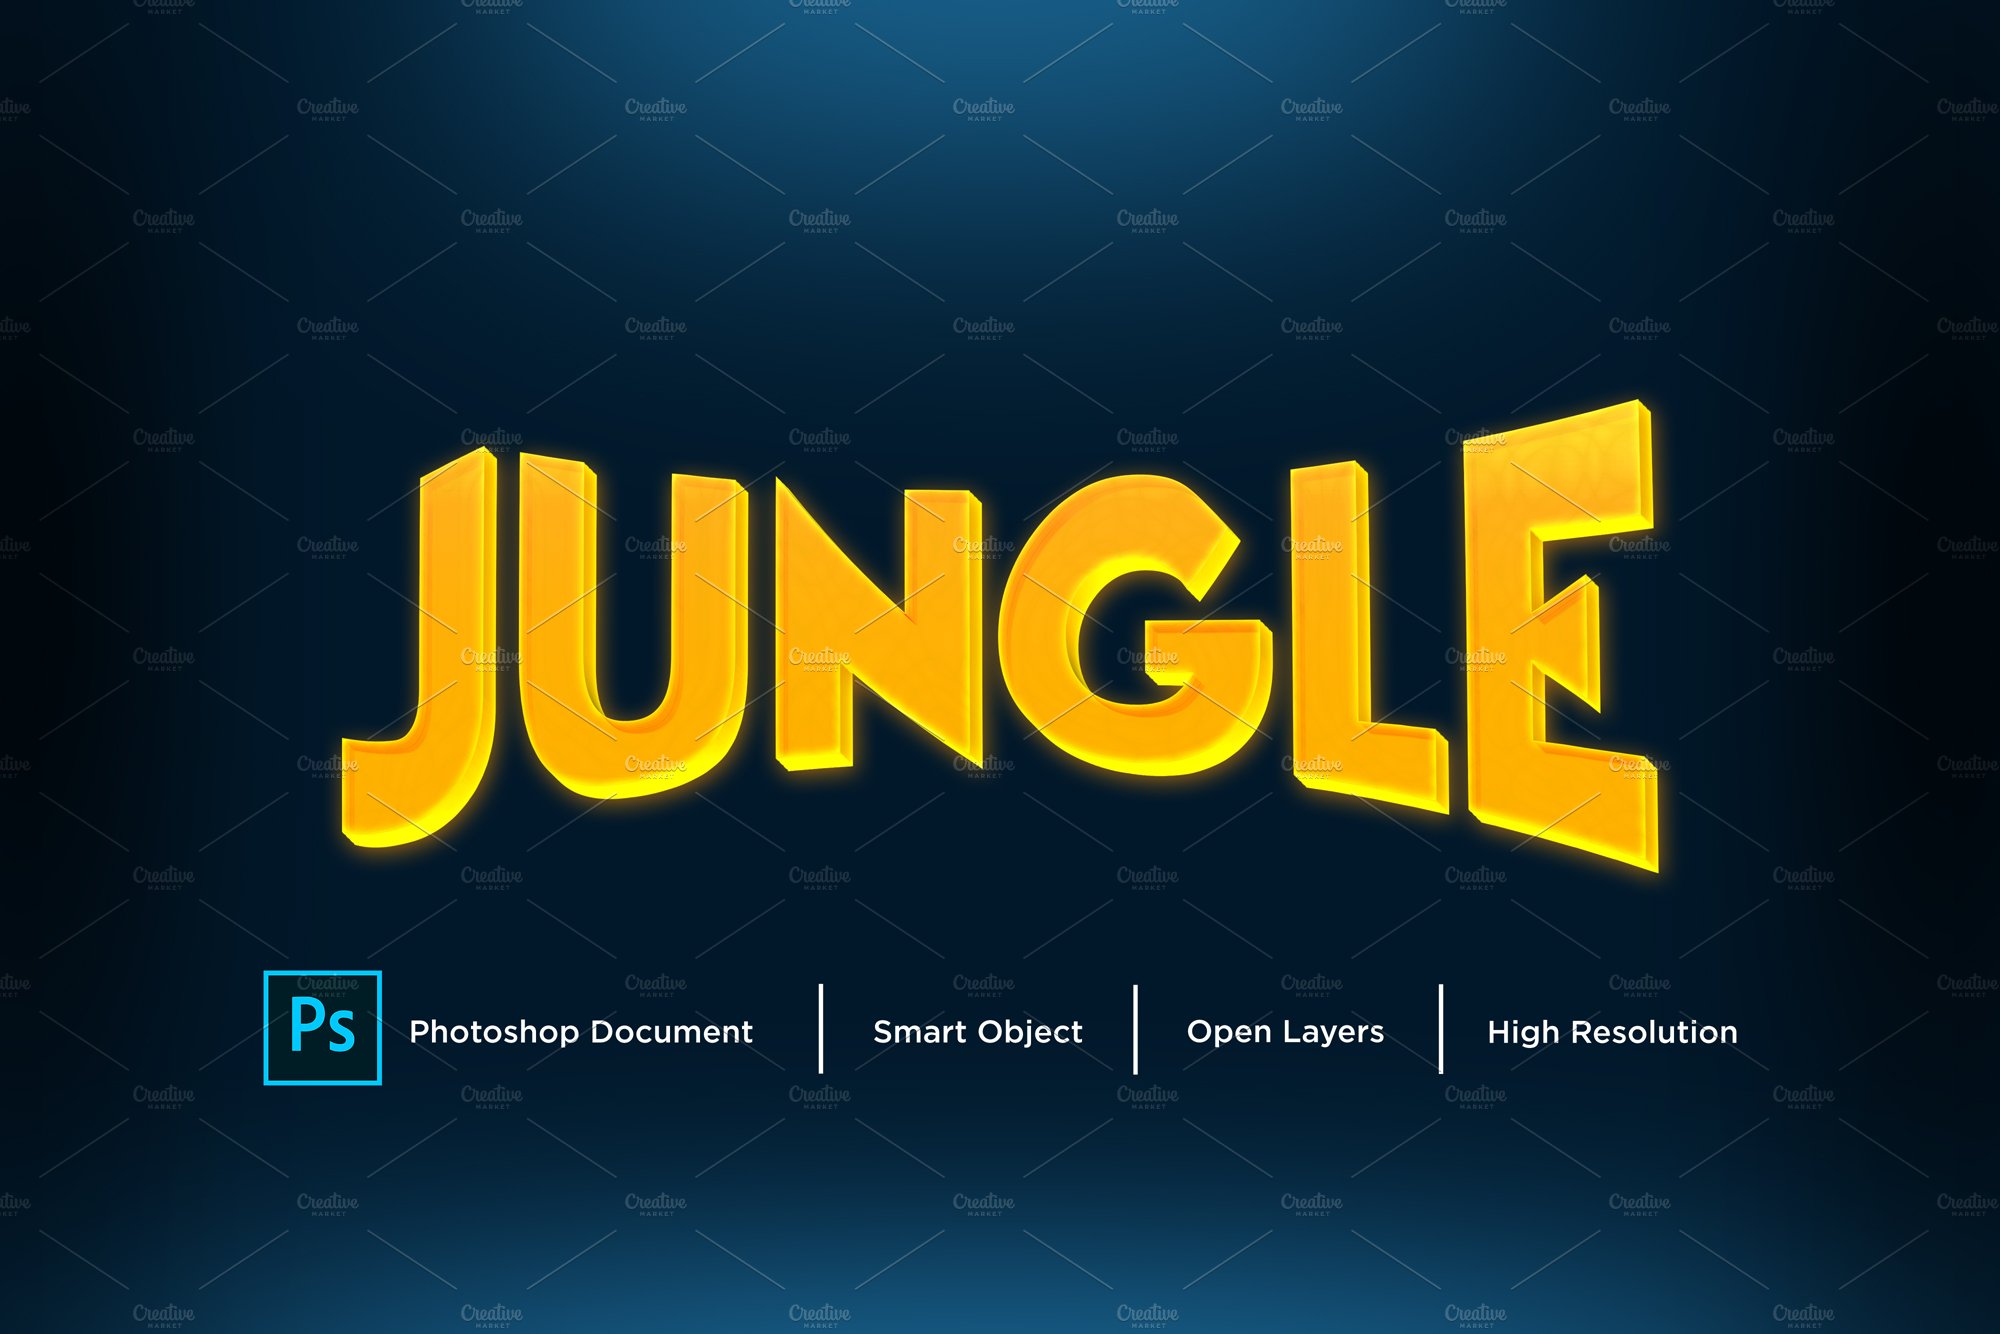 Jungle Text Effect & Layer Stylecover image.